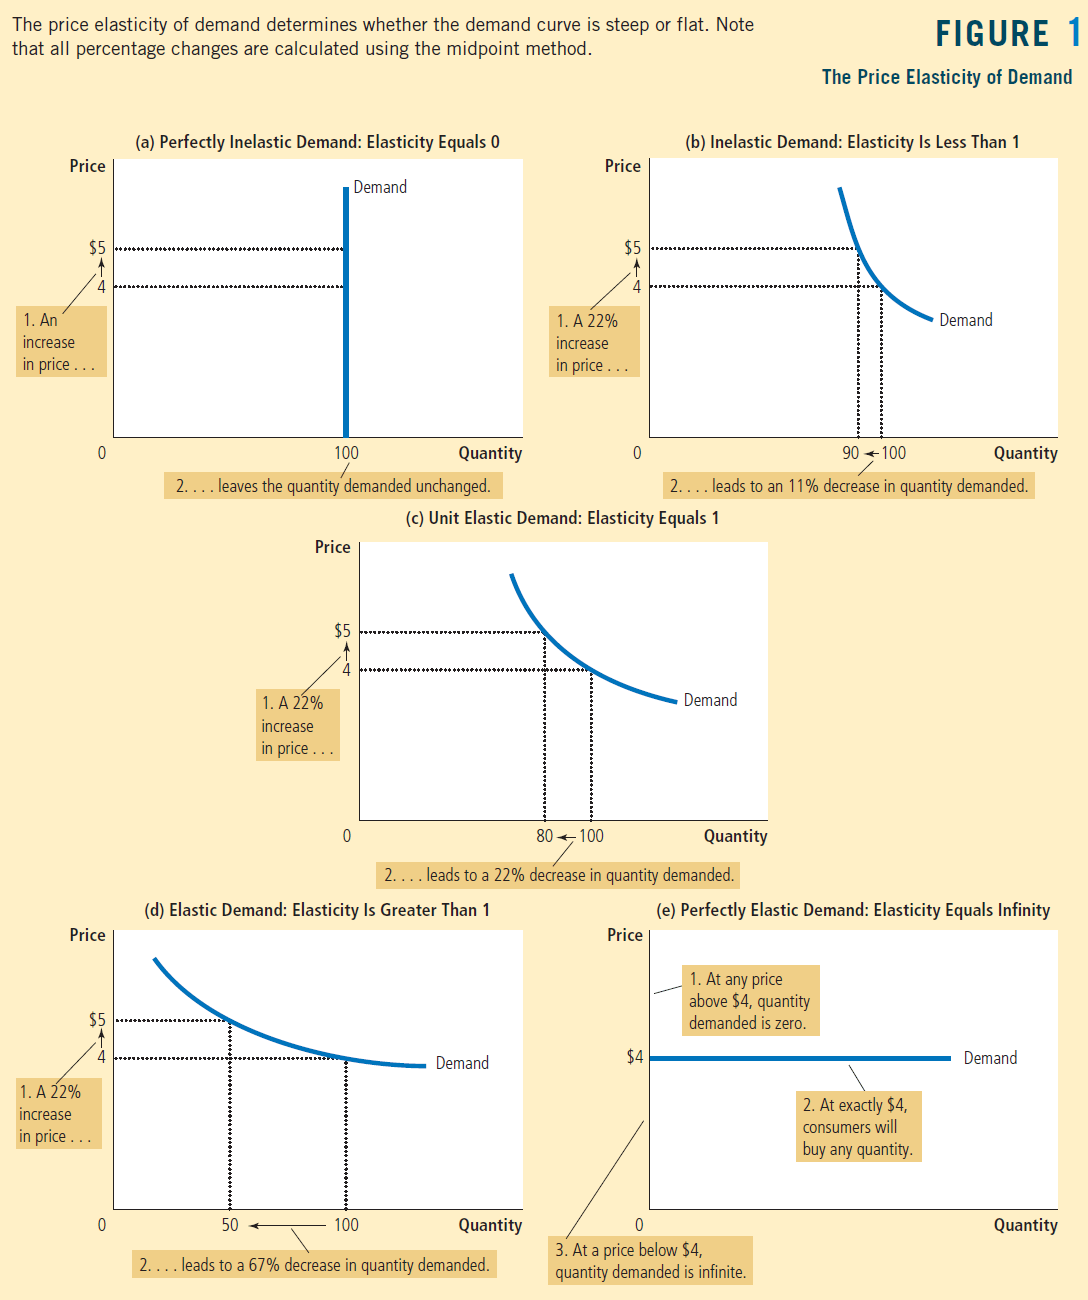 The price elasticity of demand determines whether the demand curve
is steep or flat. Note that all percentage changes are calculated
using the midpoint method 2.... 2.. 2.. 1 FIGURE The Price Elasticity
of Demand (a) Perfectly Inelastic Demand: Elasticity Equals 0 (b)
Inelastic Demand: Elasticity Is Less Than 1 Price $5 4 1. An Increase
n price . 0 Price $5 4 Increase •n price 0 Demand IOO Price $5 4
Increase In pnce . Quantity 90 IOO Demand Quantity leaves the quantity
demanded unchanged. .. leads to an 11% decrease in quantity demanded.
(c) Unit Elastic Demand: Elasticity Equals 1 Price $5 4 Increase In
price 0 IOO Demand Quantity .. leads to a 22% decrease in quantity
demanded. 2.. (d) Elastic Demand: Elasticity Is Greater Than 1 50 IOO
Demand Quantity Price $4 0 (e) Perfectly Elastic Demand: Elasticity
Equals Infinity . At any price above $4, quantity manded is zero.
Demand . At exactly $4, consumers will buy any quantity. Quantity ..
leads to a 67% decrease in quantity demanded. 3. At a price below $4,
quantity demanded is infinite. 